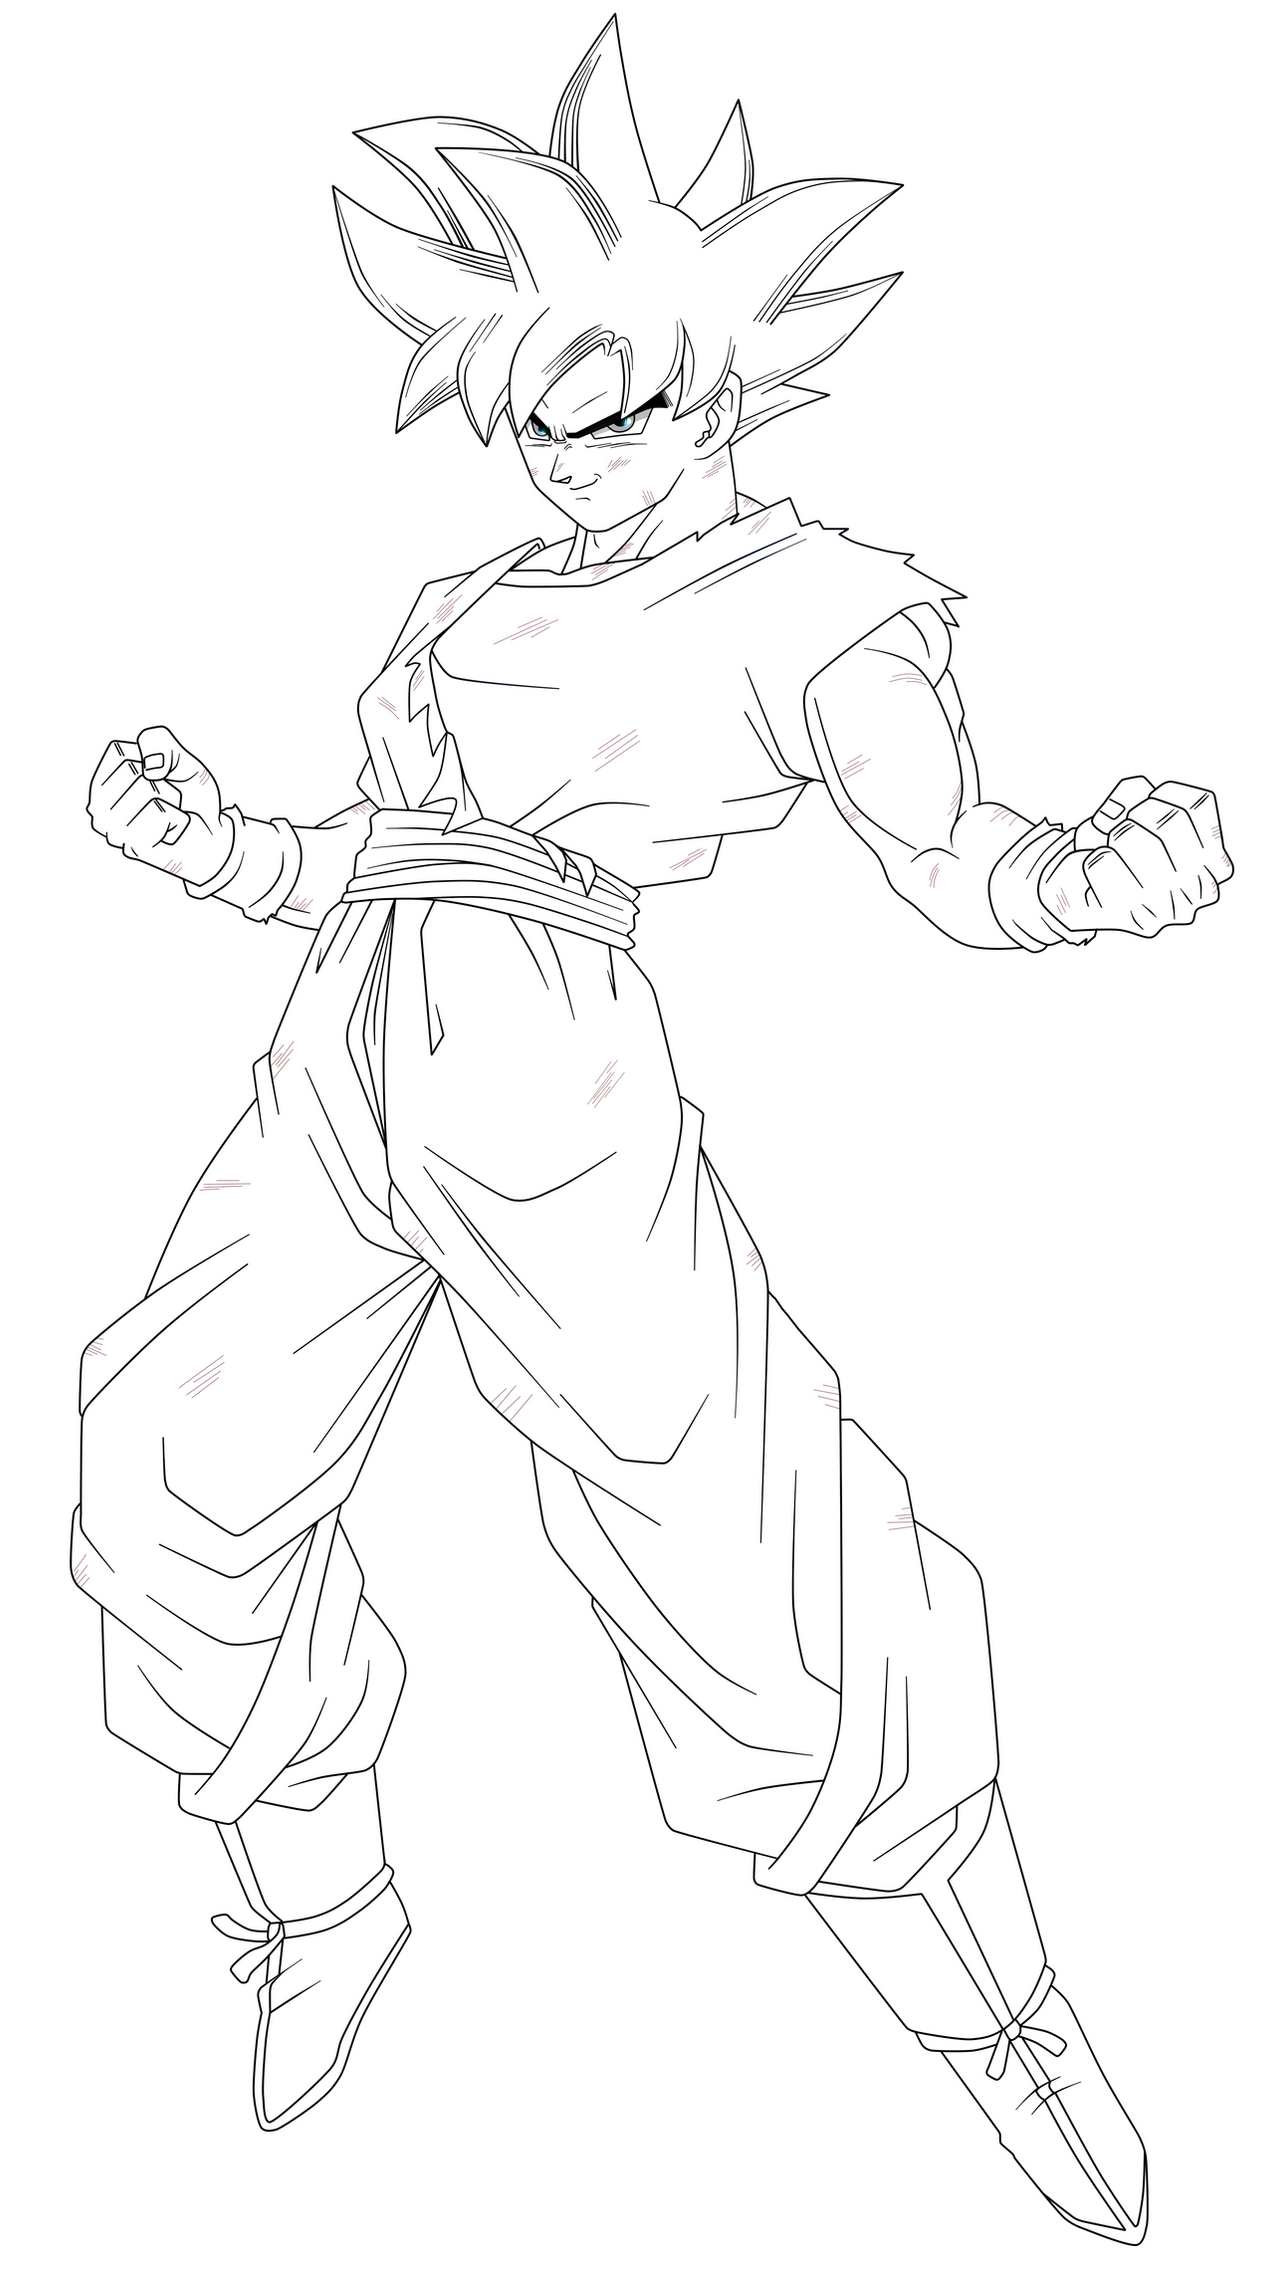 Goku In The Limit - Lineart by SaoDVD on DeviantArt